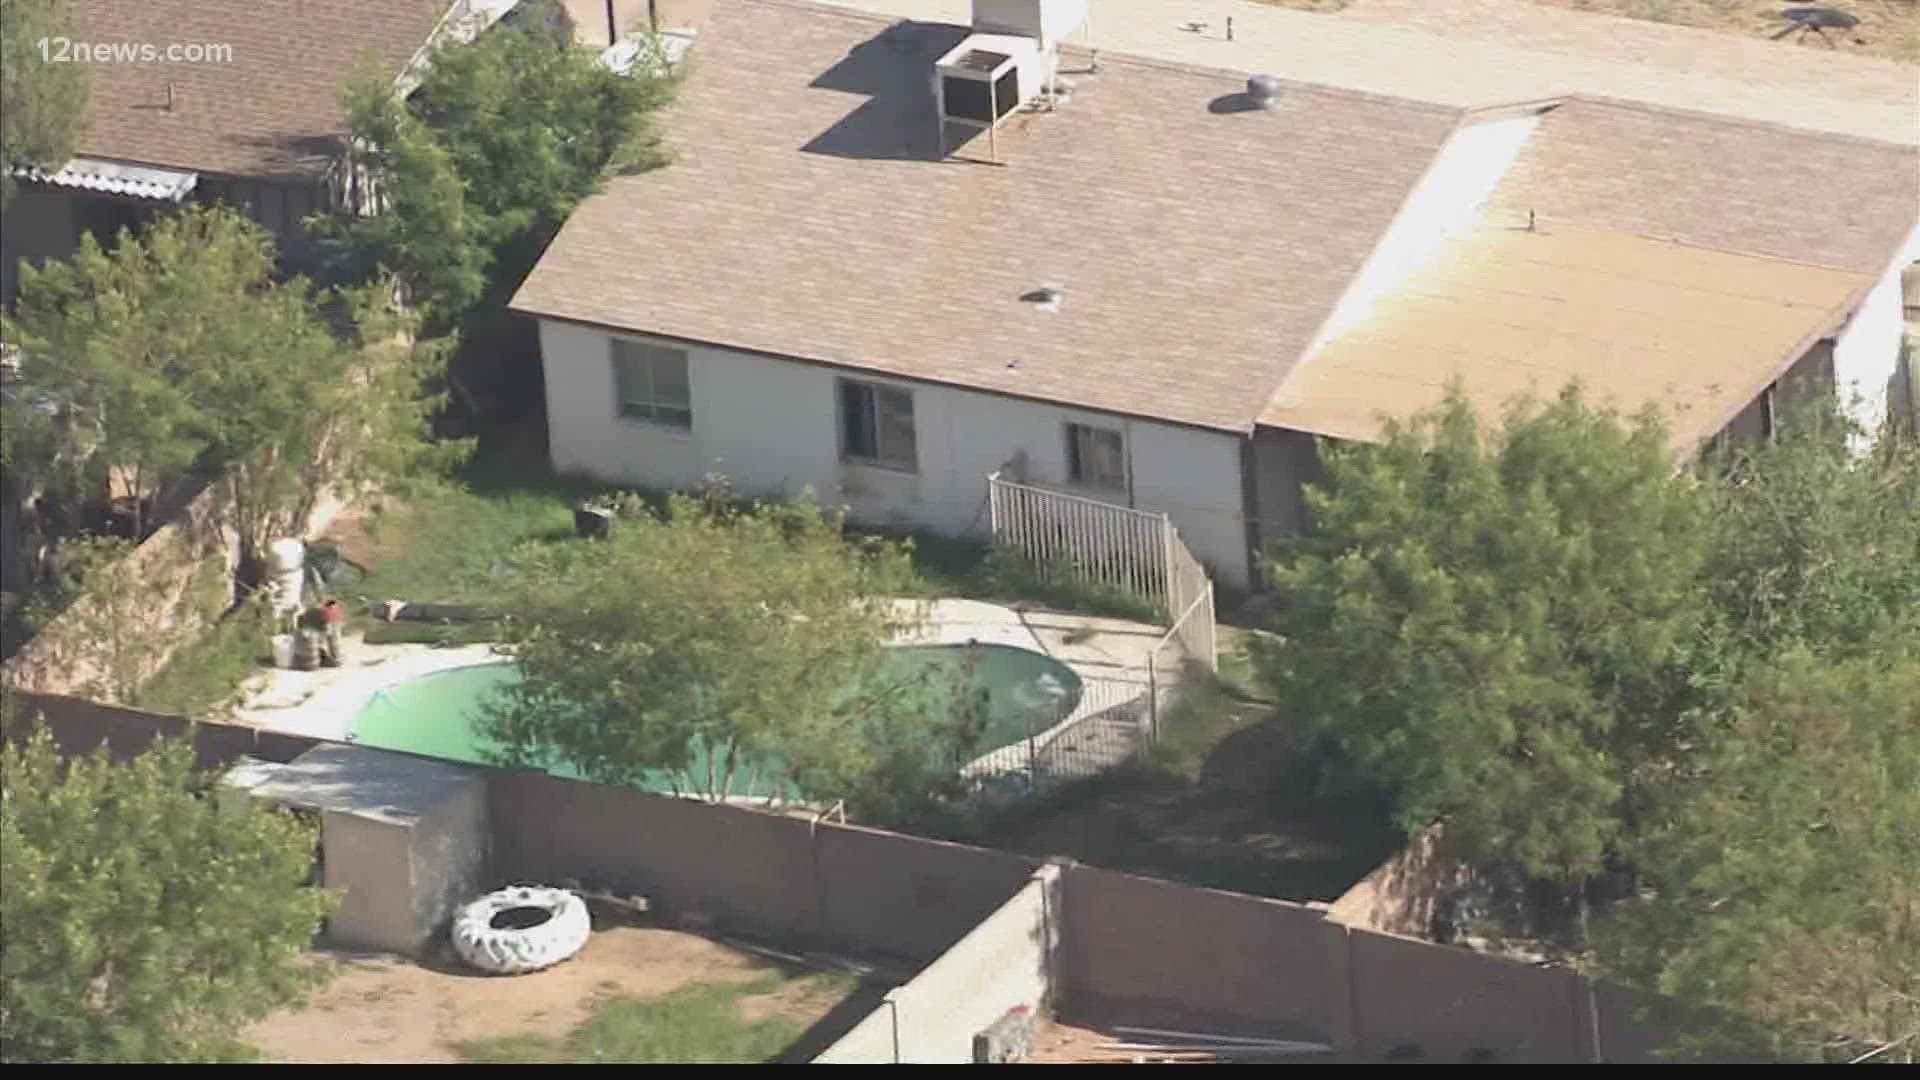 A 3-year-old girl has died after being pulled from a backyard pool in west Phoenix Friday.